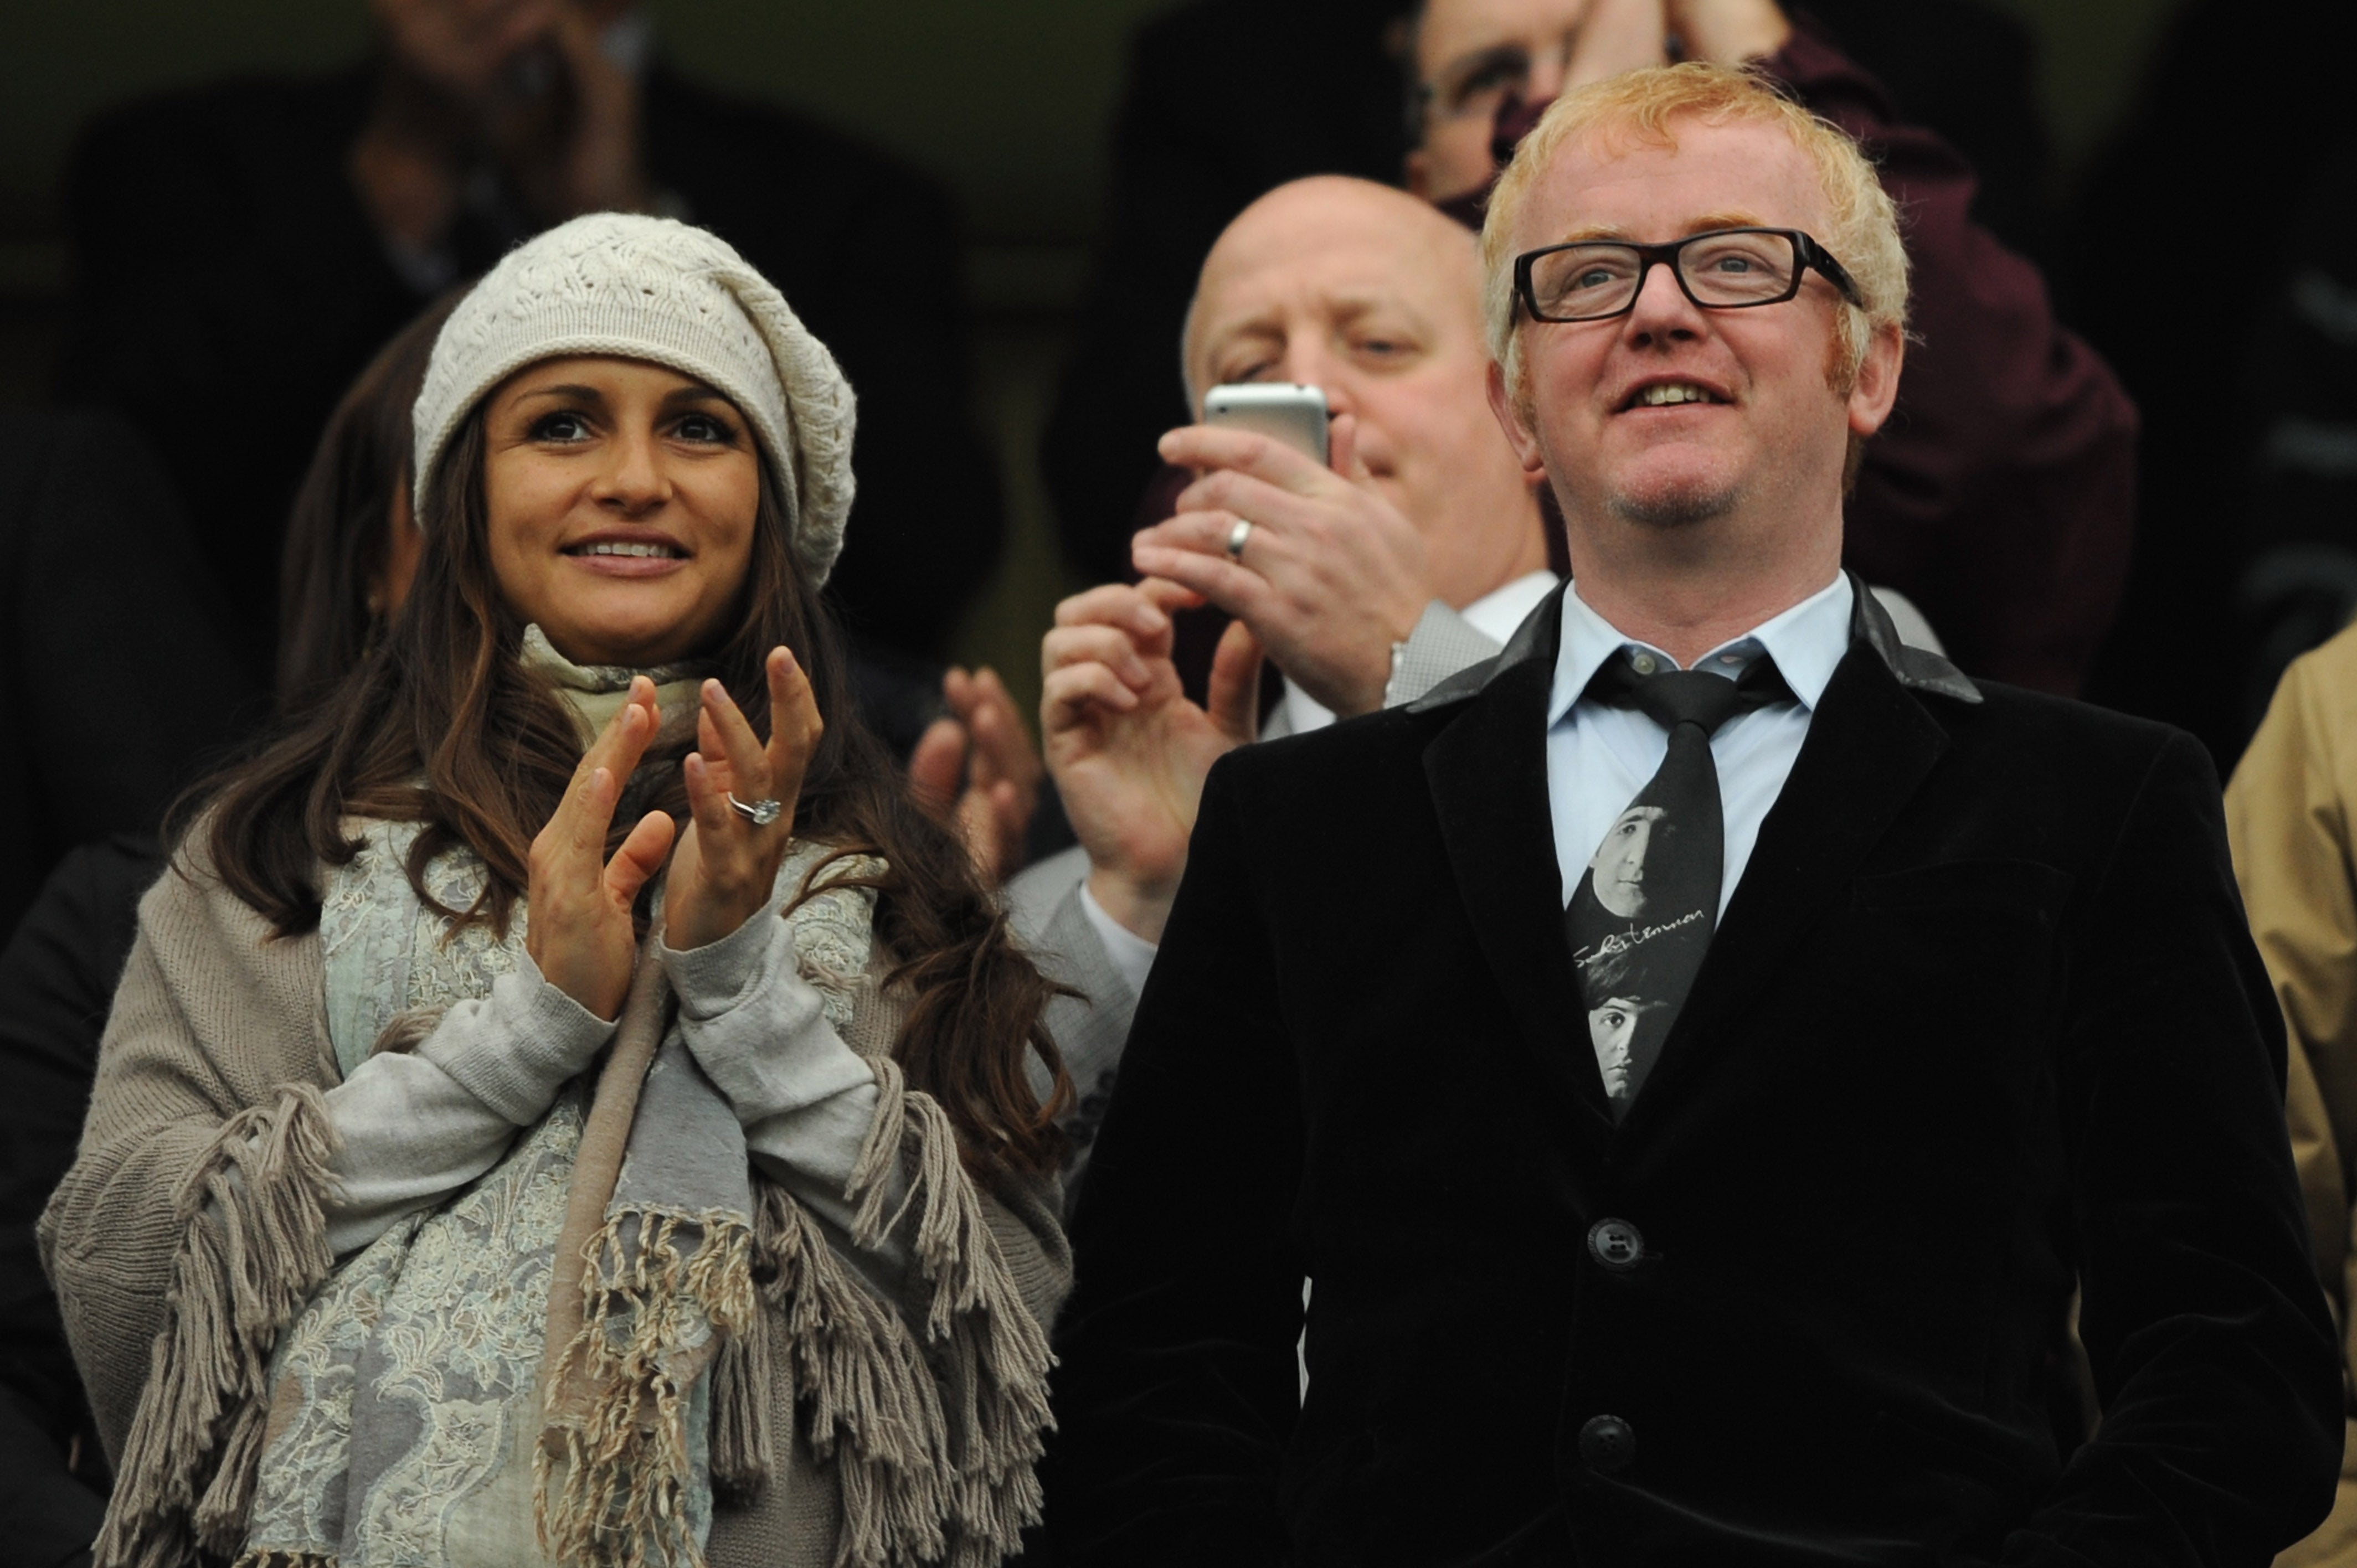 Radio DJ Chris Evans attends the Barclays Premier League match between Chelsea and Liverpool at Stamford Bridge on October 26, 2008